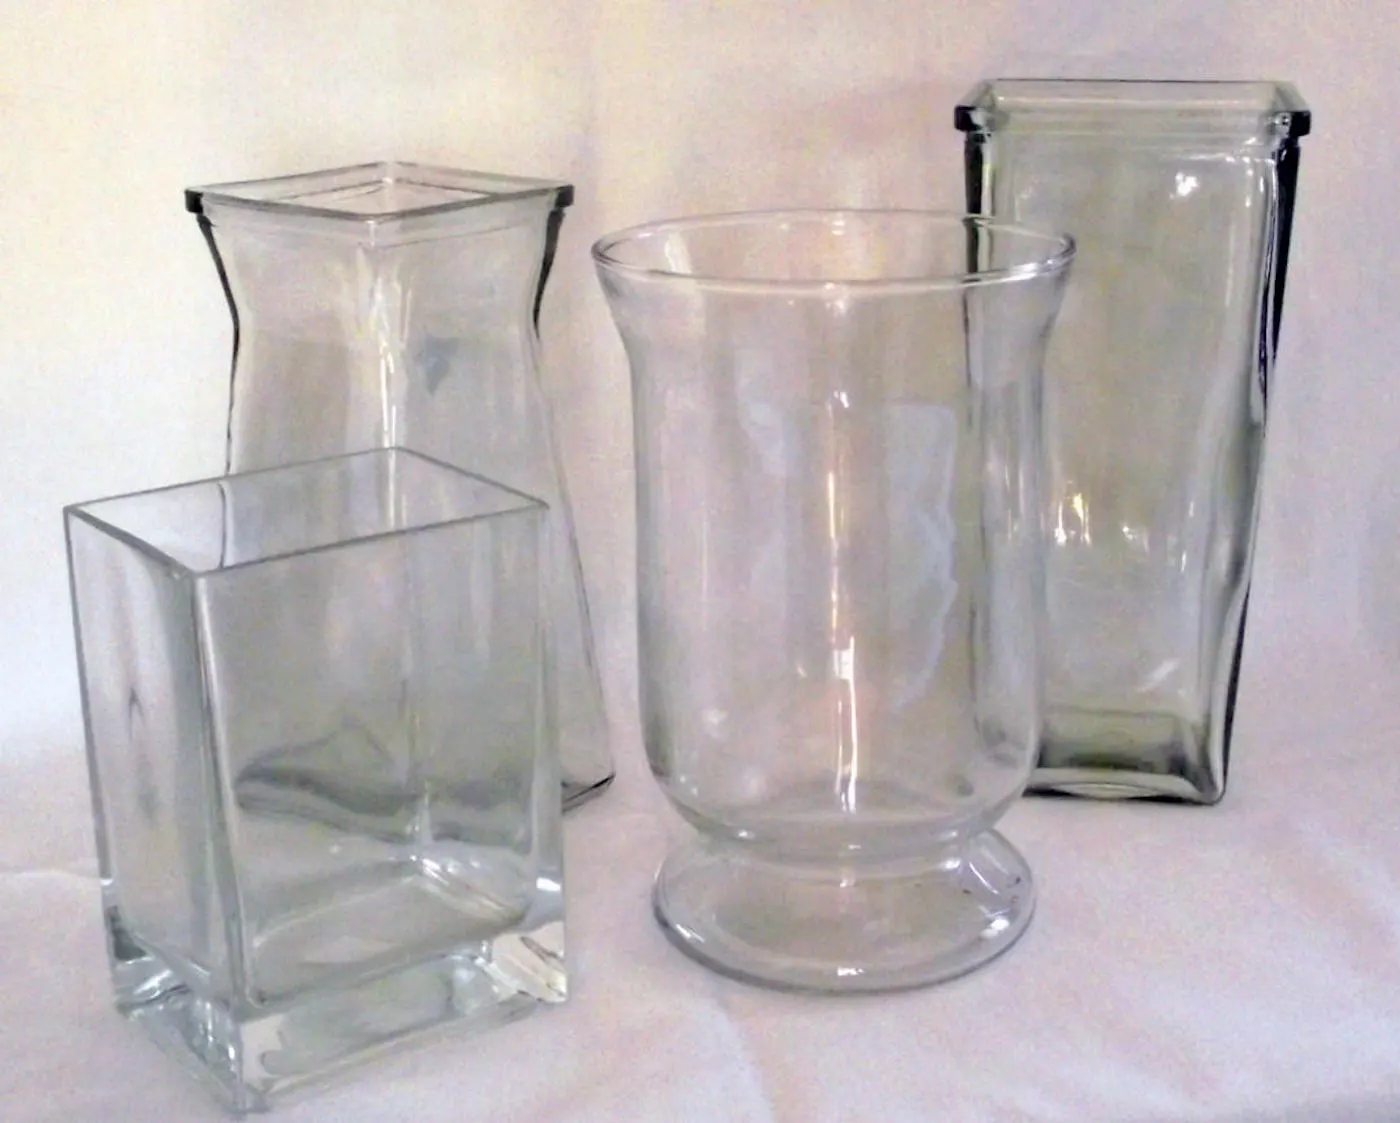 Collection of glass vases from the thrift store